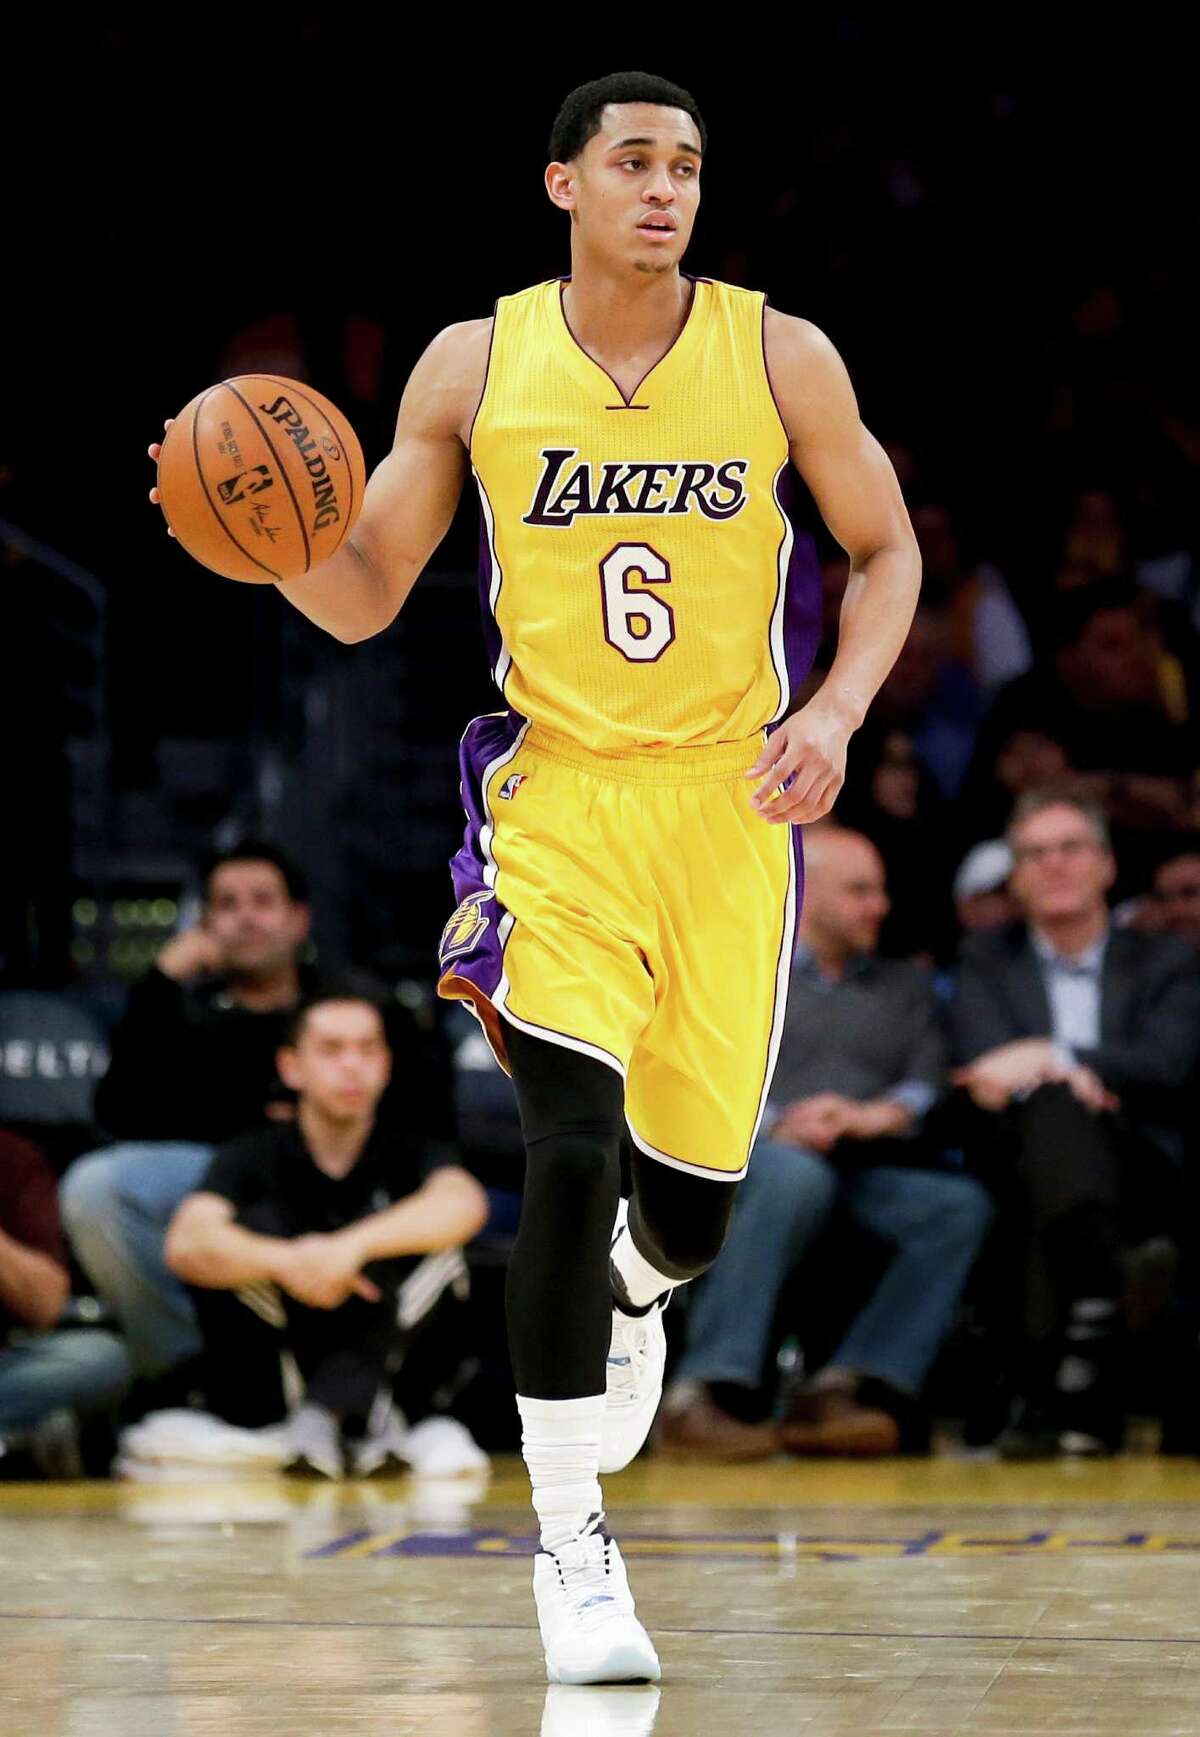 Los Angeles Lakers guard Jordan Clarkson of San Antonio is one of a handful of San Antonians who were rumored to be dating a celebrity.